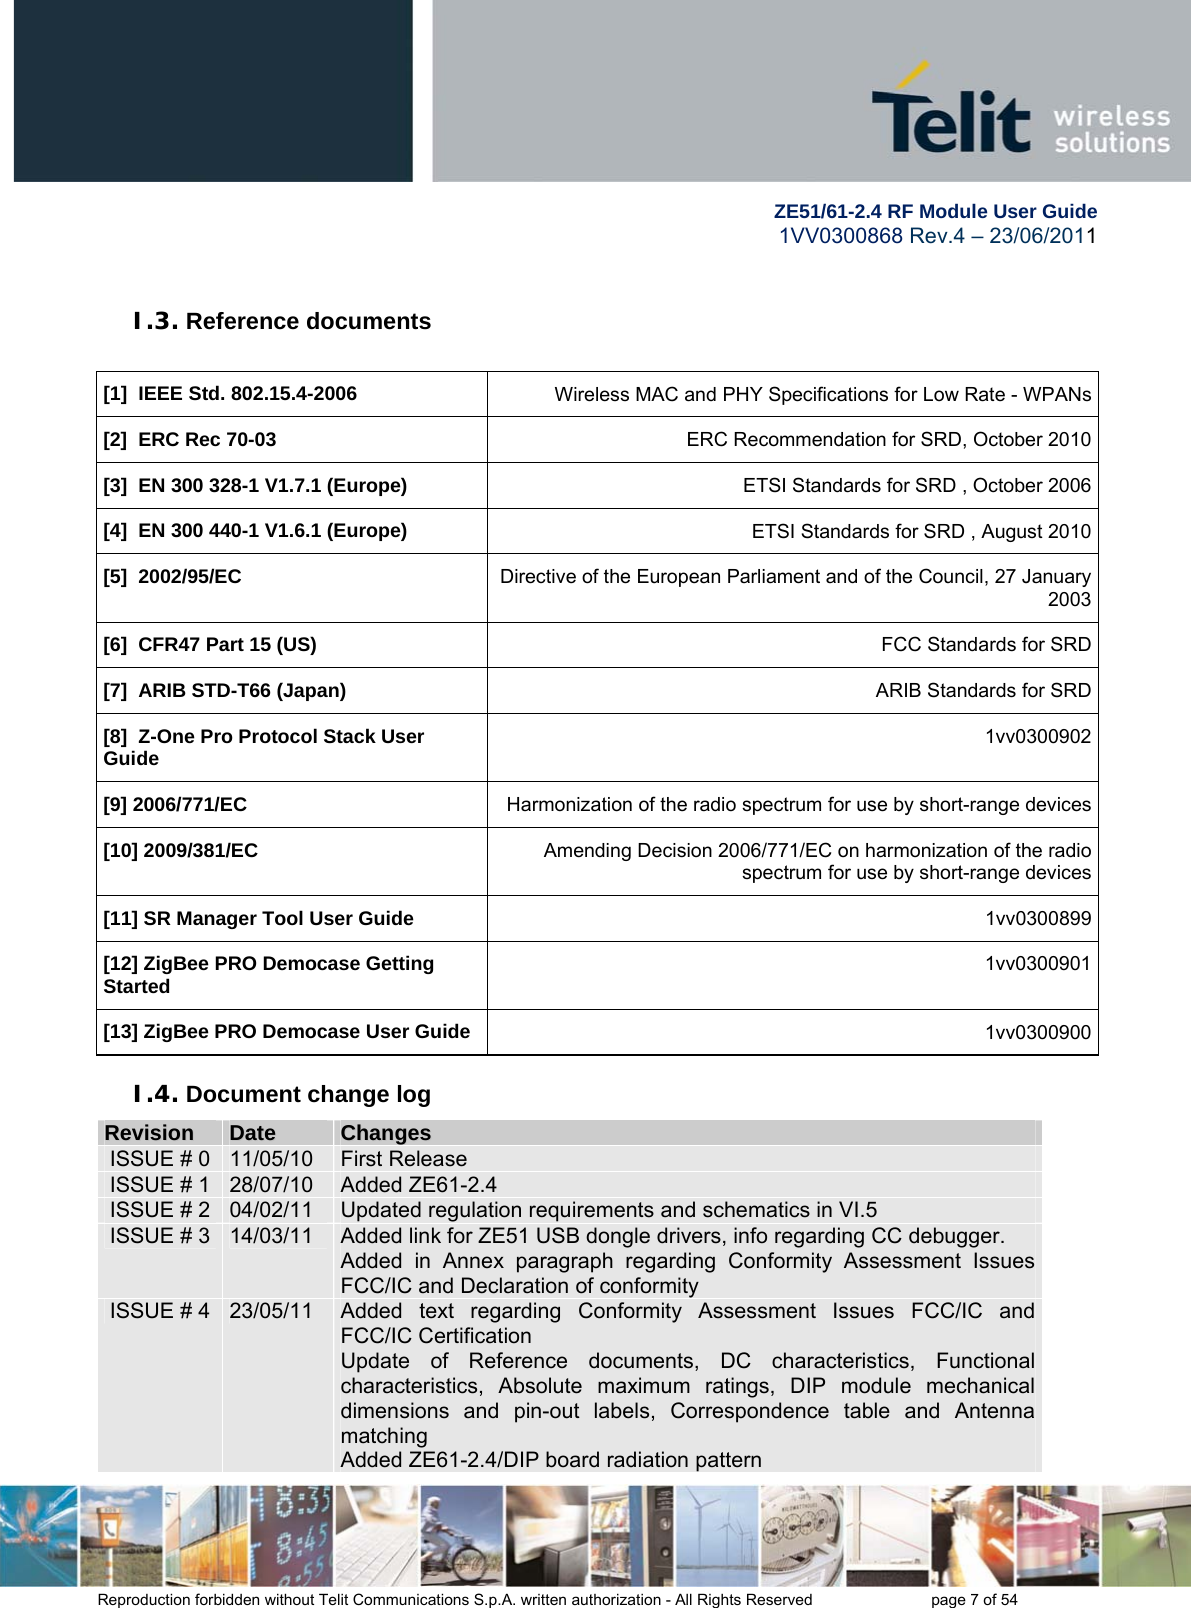        ZE51/61-2.4 RF Module User Guide 1VV0300868 Rev.4 – 23/06/2011 Reproduction forbidden without Telit Communications S.p.A. written authorization - All Rights Reserved    page 7 of 54  I.3. Reference documents  [1]  IEEE Std. 802.15.4-2006  Wireless MAC and PHY Specifications for Low Rate - WPANs[2]  ERC Rec 70-03 ERC Recommendation for SRD, October 2010[3]  EN 300 328-1 V1.7.1 (Europe) ETSI Standards for SRD , October 2006[4]  EN 300 440-1 V1.6.1 (Europe) ETSI Standards for SRD , August 2010[5]  2002/95/EC Directive of the European Parliament and of the Council, 27 January 2003[6]  CFR47 Part 15 (US) FCC Standards for SRD[7]  ARIB STD-T66 (Japan) ARIB Standards for SRD[8]  Z-One Pro Protocol Stack User Guide 1vv0300902[9] 2006/771/EC  Harmonization of the radio spectrum for use by short-range devices[10] 2009/381/EC  Amending Decision 2006/771/EC on harmonization of the radio spectrum for use by short-range devices[11] SR Manager Tool User Guide 1vv0300899 [12] ZigBee PRO Democase Getting Started  1vv0300901[13] ZigBee PRO Democase User Guide  1vv0300900I.4. Document change log RReevviissiioonn  DDaattee  CChhaannggeess  ISSUE # 0  11/05/10  First Release ISSUE # 1  28/07/10  Added ZE61-2.4 ISSUE # 2  04/02/11  Updated regulation requirements and schematics in VI.5 ISSUE # 3  14/03/11  Added link for ZE51 USB dongle drivers, info regarding CC debugger. Added in Annex paragraph regarding Conformity Assessment Issues FCC/IC and Declaration of conformity ISSUE # 4  23/05/11  Added text regarding Conformity Assessment Issues FCC/IC and FCC/IC Certification Update of Reference documents, DC characteristics, Functional characteristics, Absolute maximum ratings, DIP module mechanical dimensions and pin-out labels, Correspondence table and Antenna matching Added ZE61-2.4/DIP board radiation pattern